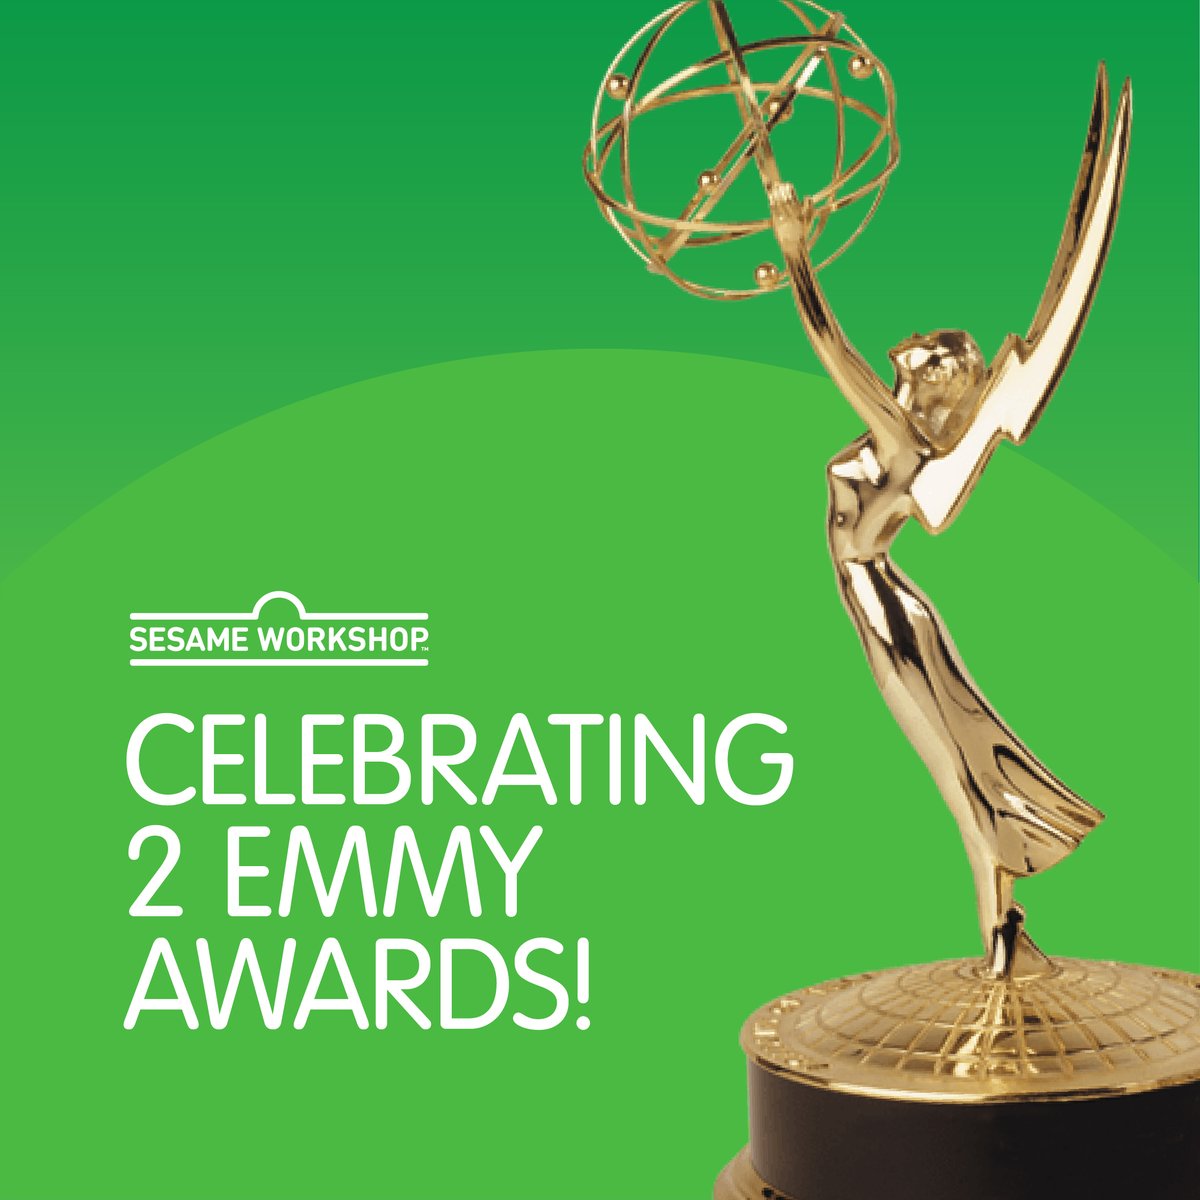 Last night “Street Gang: How We Got to Sesame Street” and “Through Our Eyes: Apart” were recognized at the 43rd News and Documentary Emmy Awards! Winning Outstanding Arts and Culture Documentary, and Outstanding Short Documentary, respectively. #DocEmmys